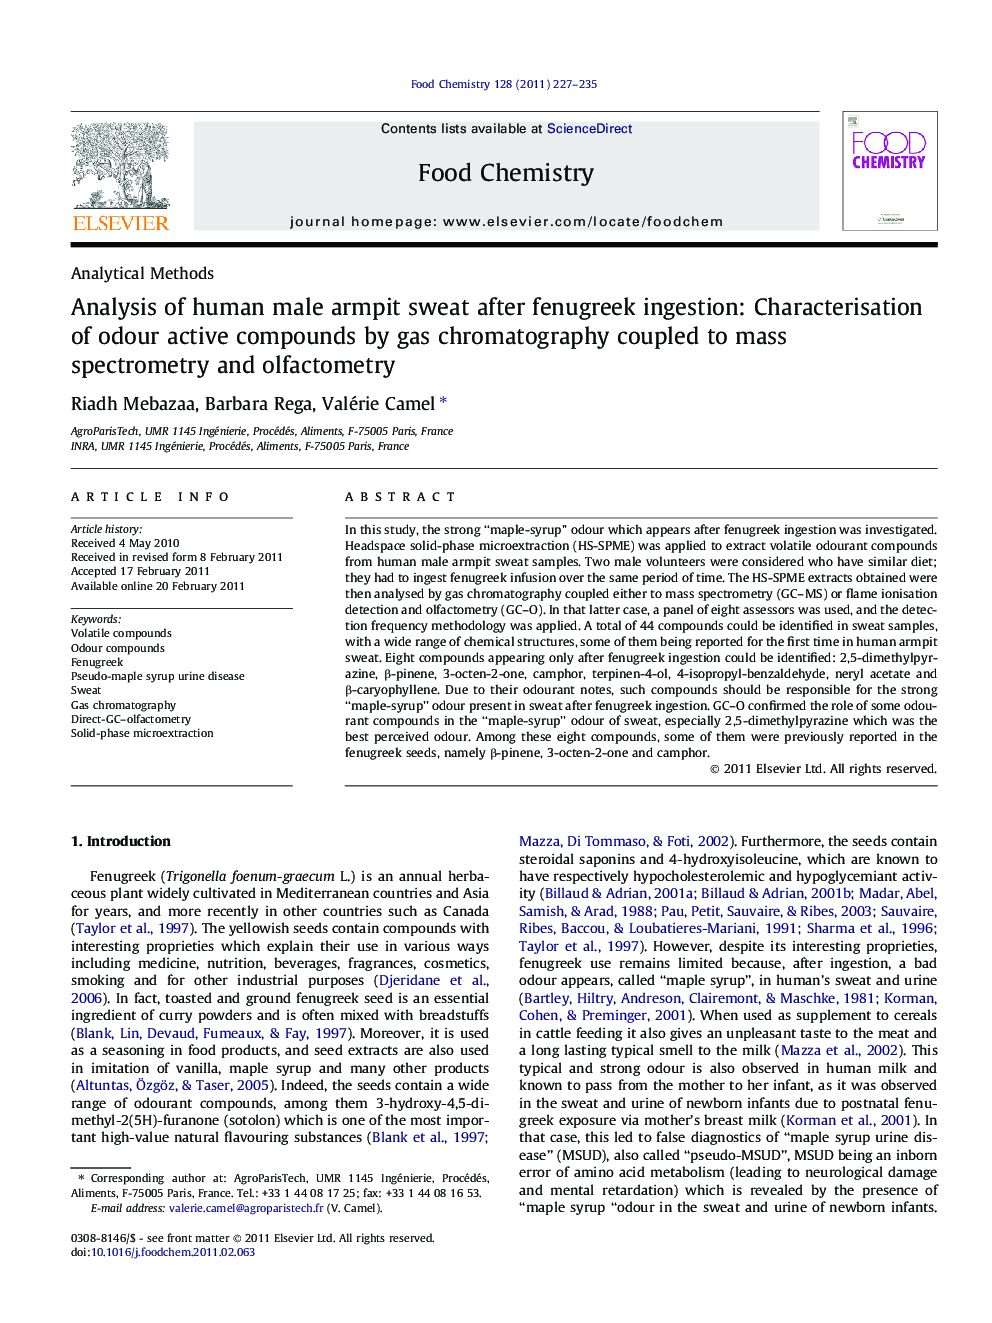 Analysis of human male armpit sweat after fenugreek ingestion: Characterisation of odour active compounds by gas chromatography coupled to mass spectrometry and olfactometry